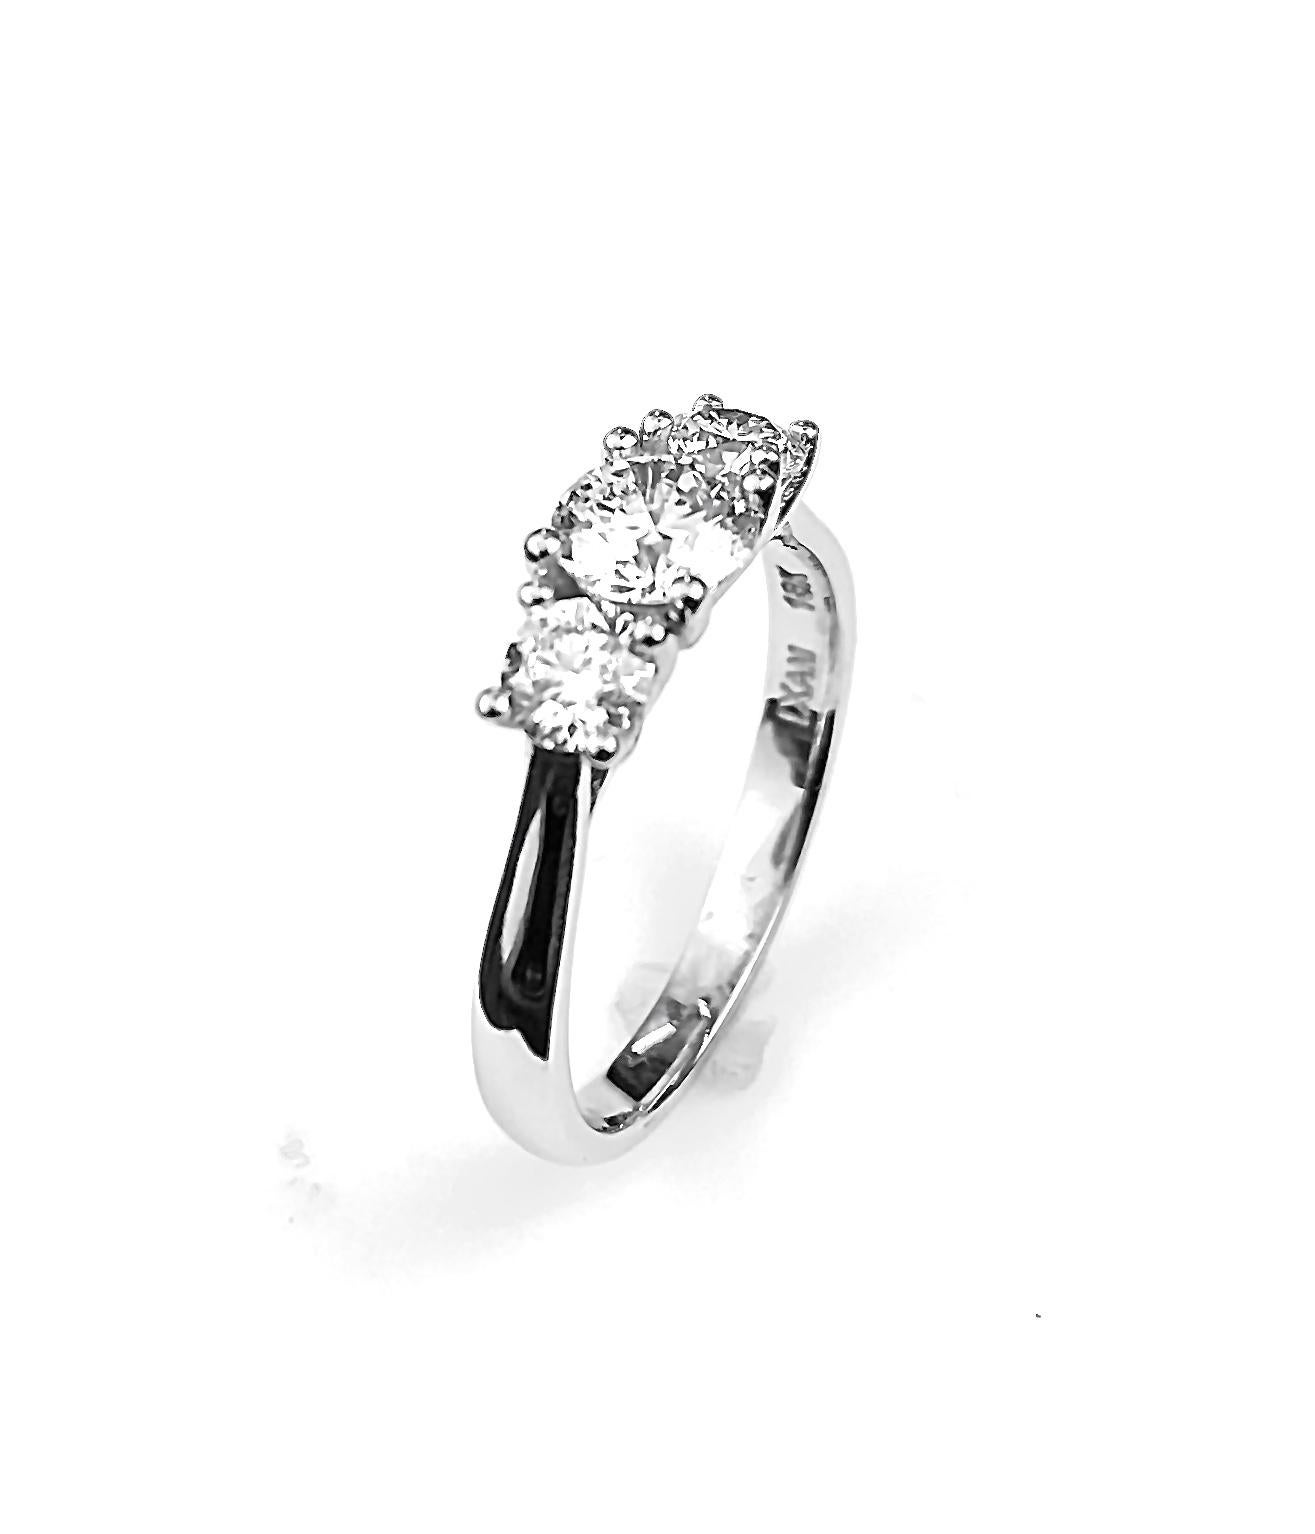 Women's Three-Diamond Ring with 0.60 Carat Center Diamond in White Gold For Sale